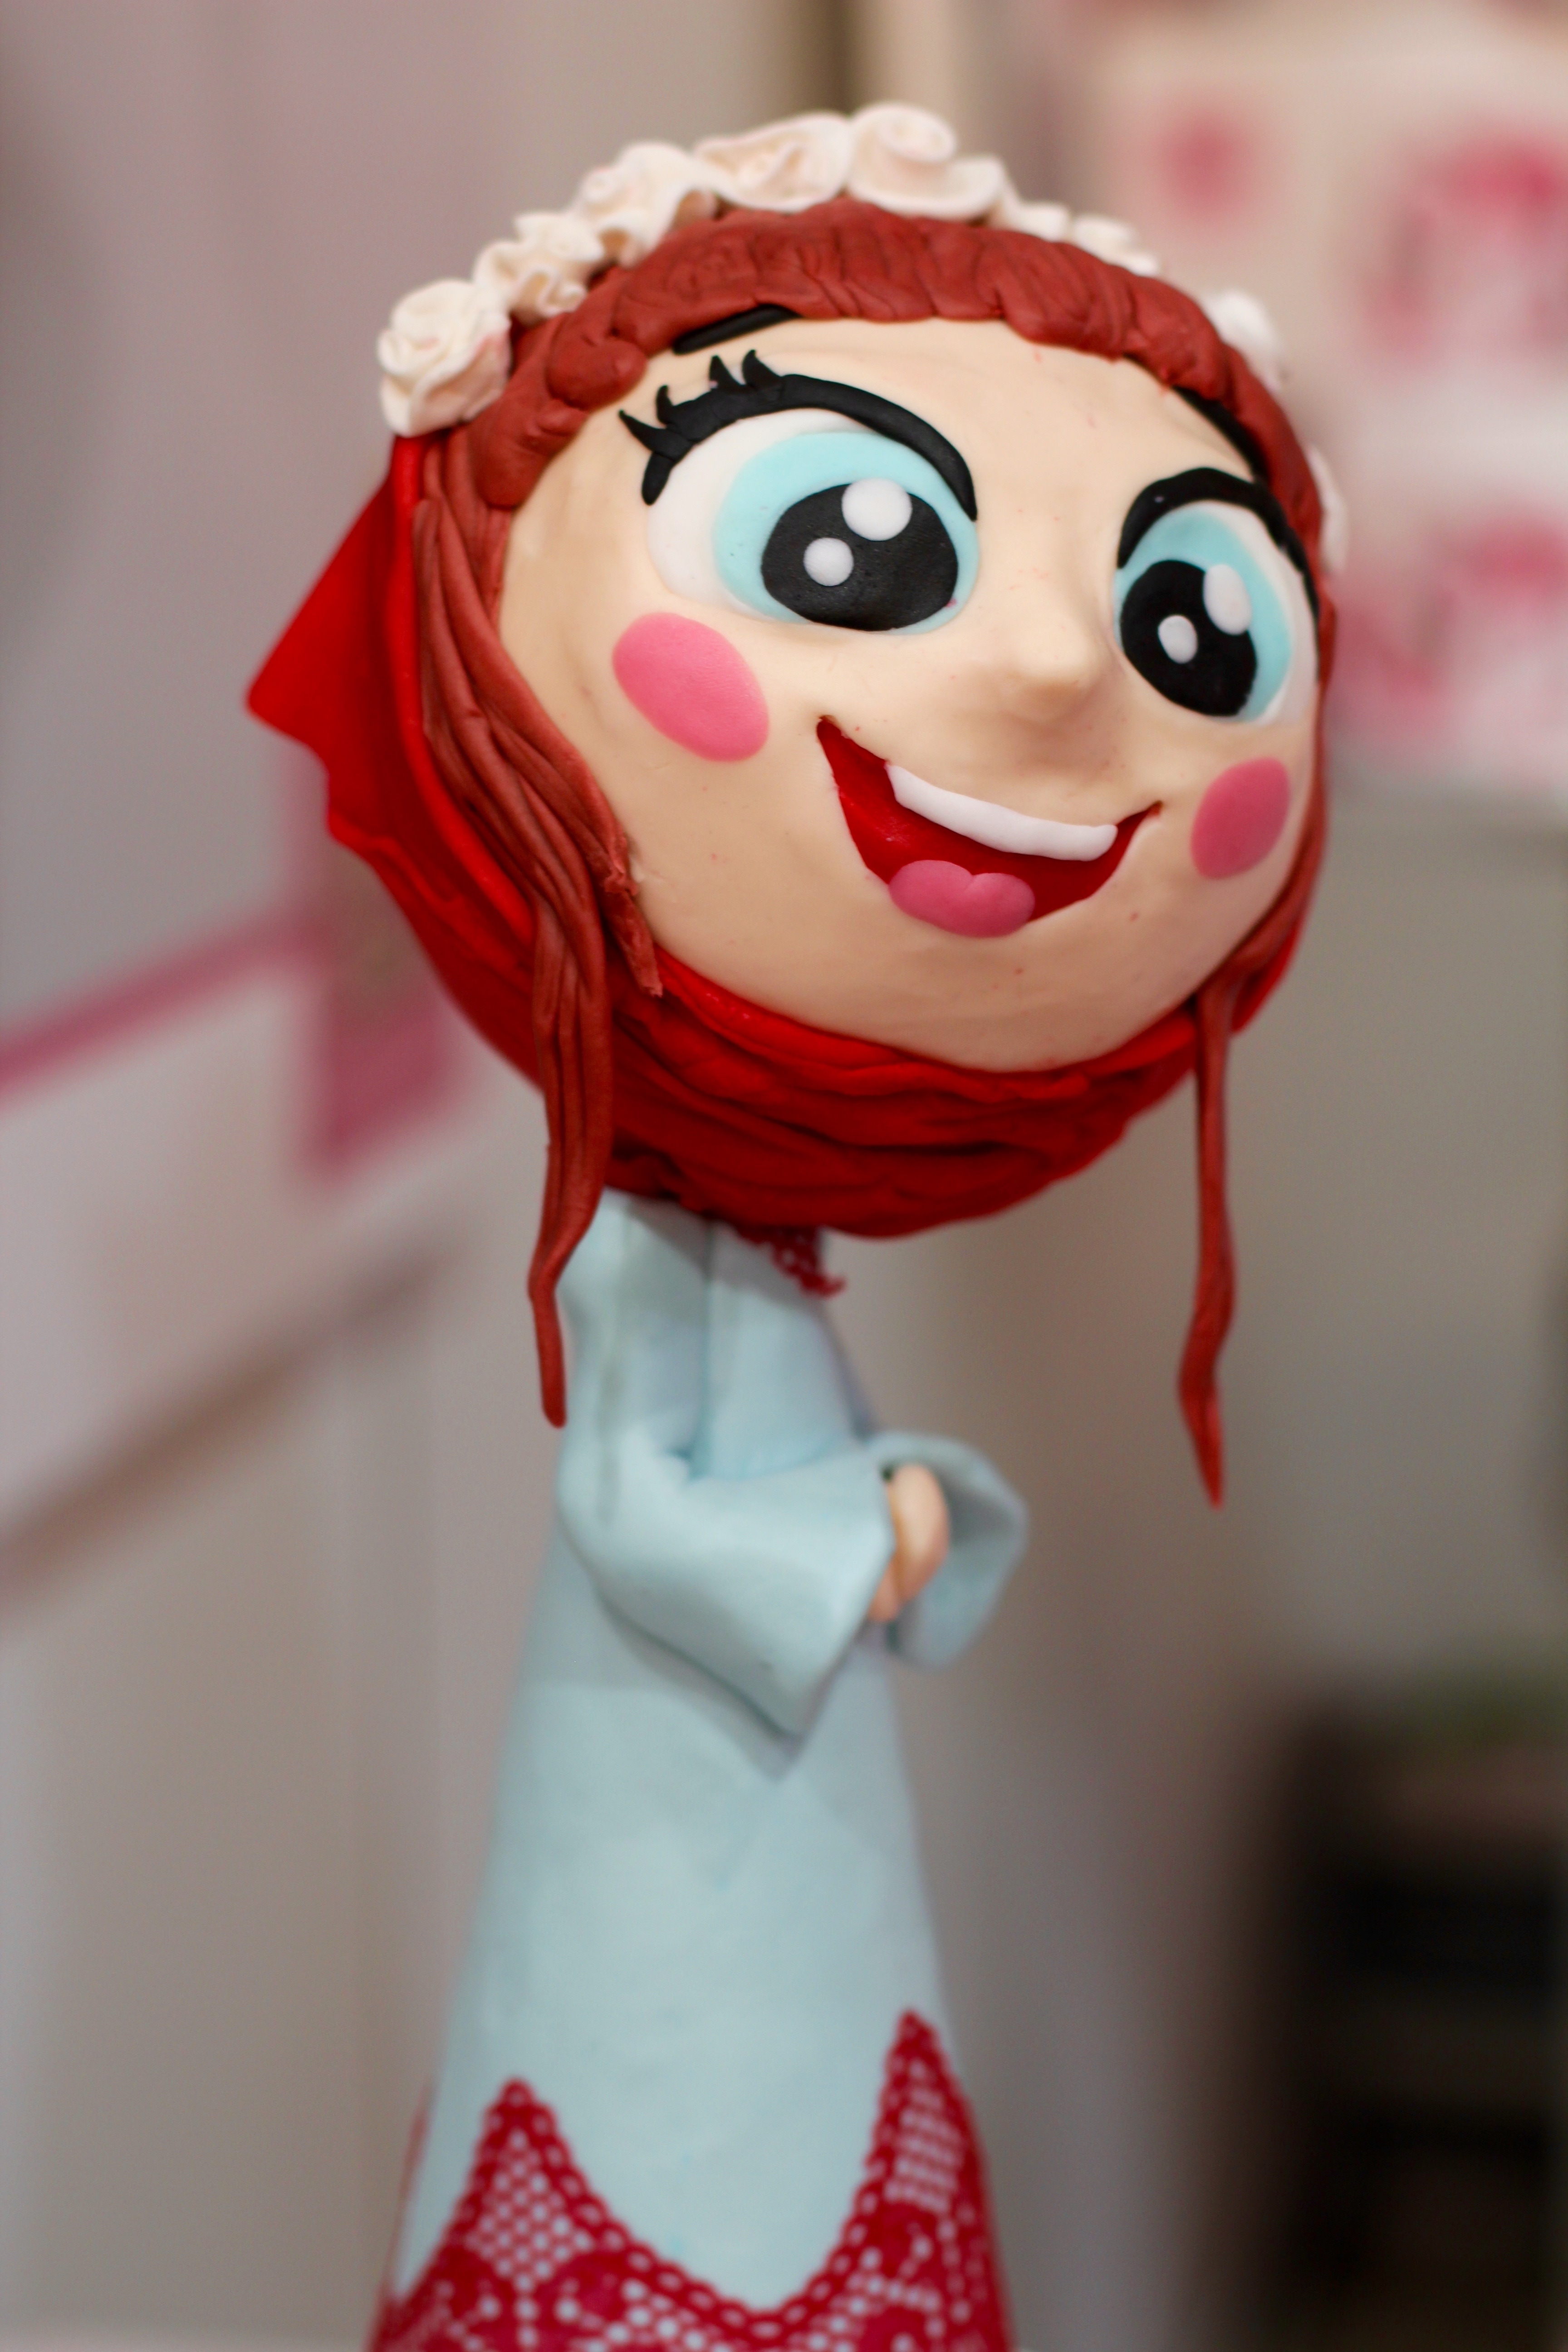 red haired female character toy